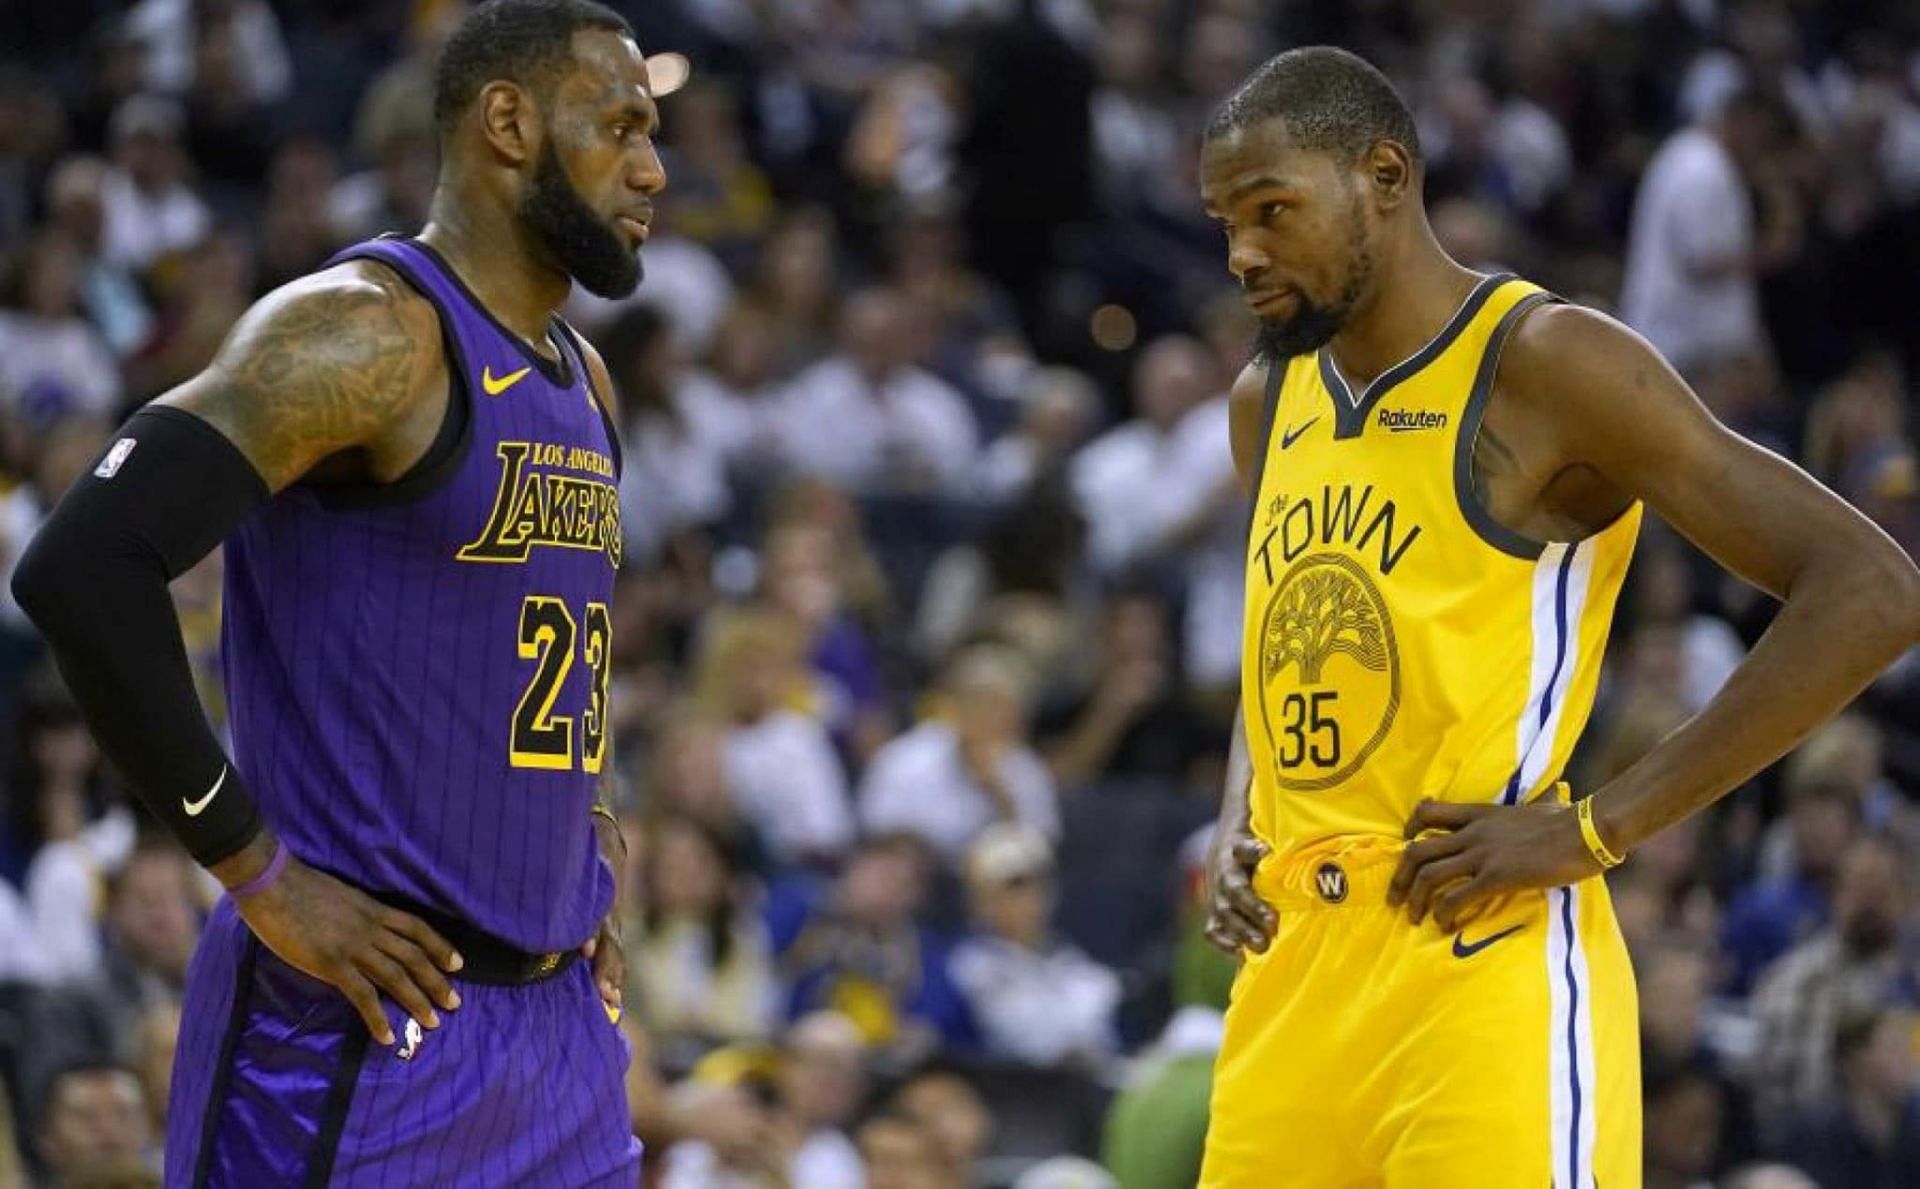 The last time fans saw LeBron James versus Kevin Durant was in 2018